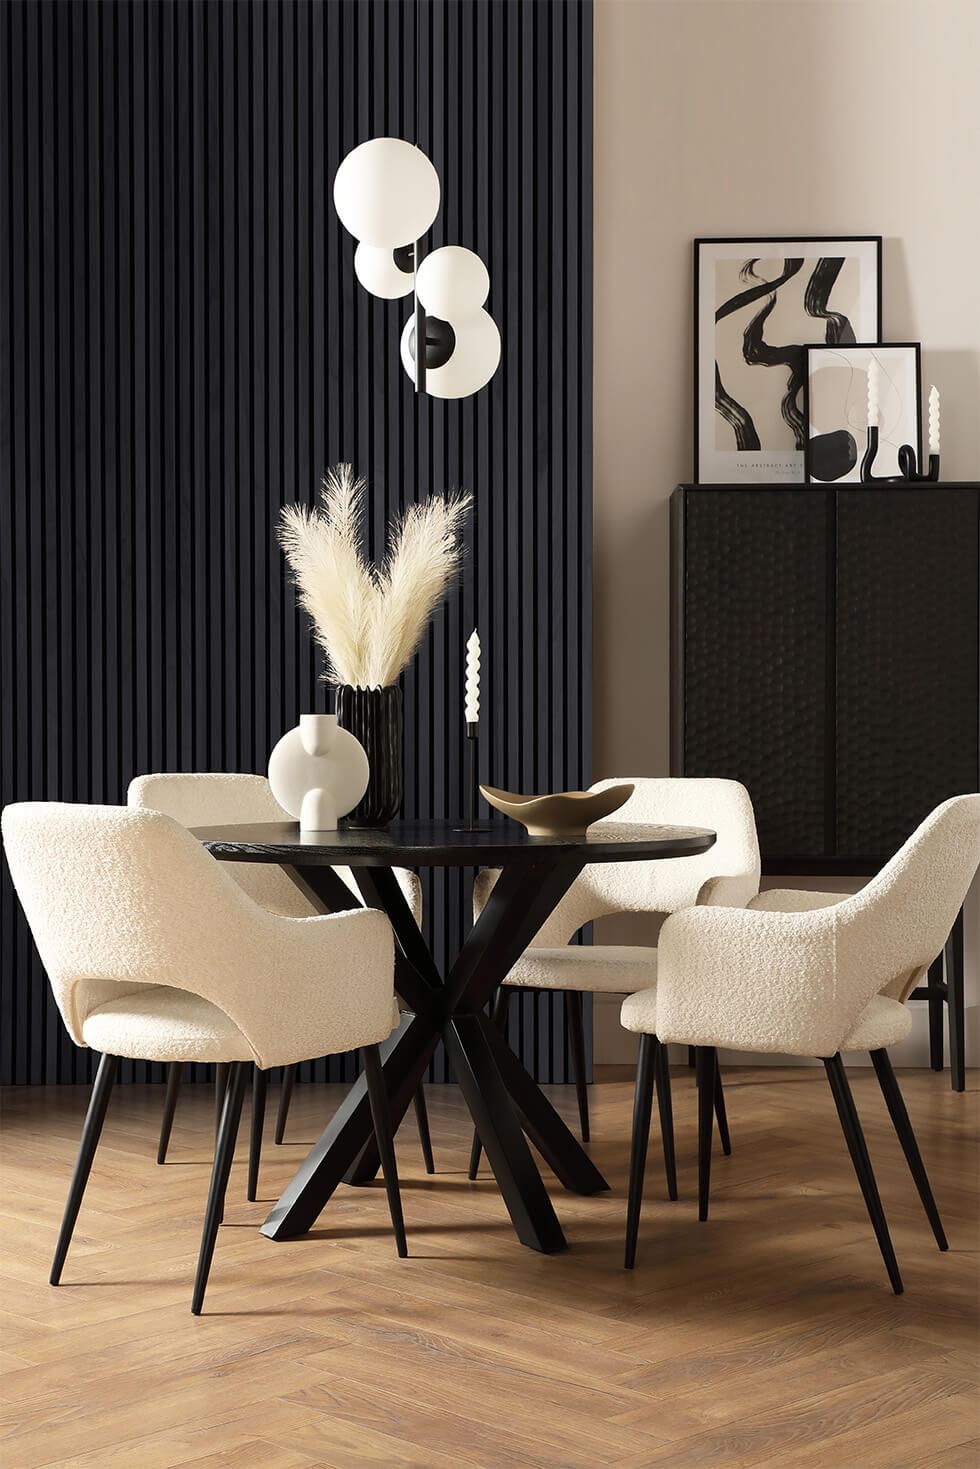 Small dining room with black wall slats and black and white dining set